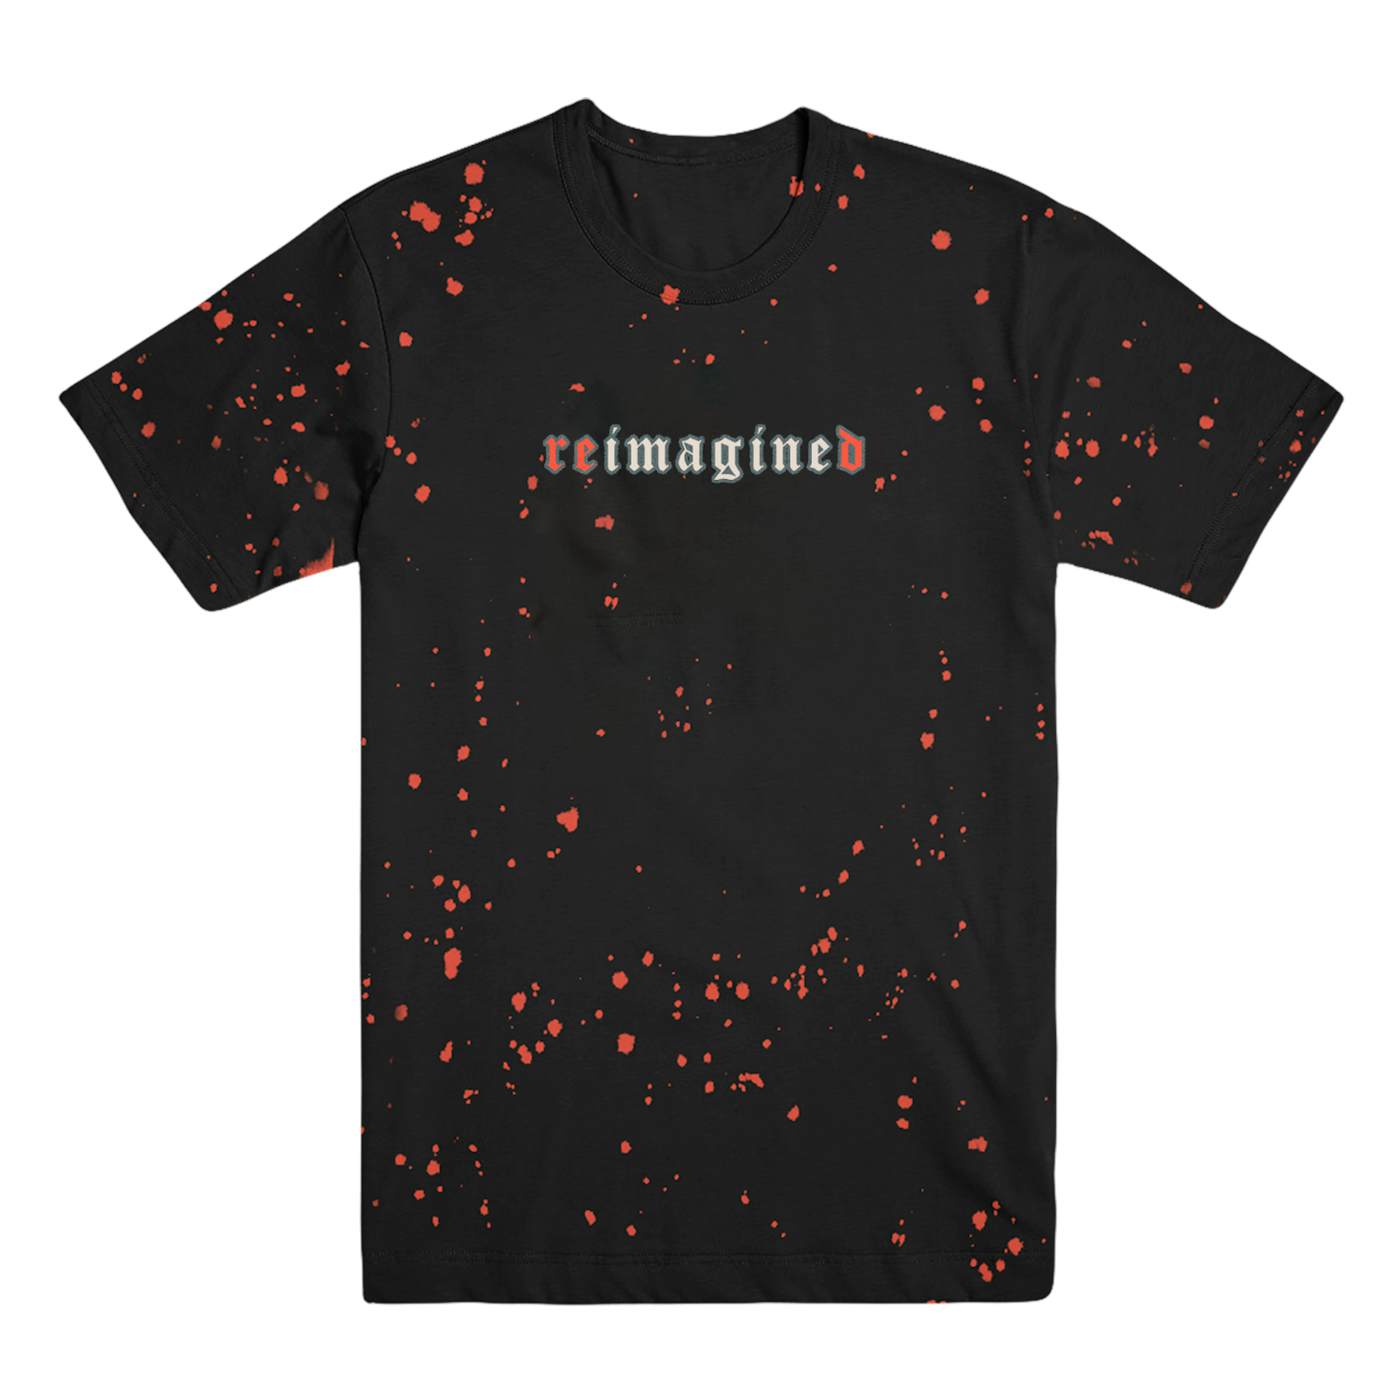 AS IT IS Reimagined Tee